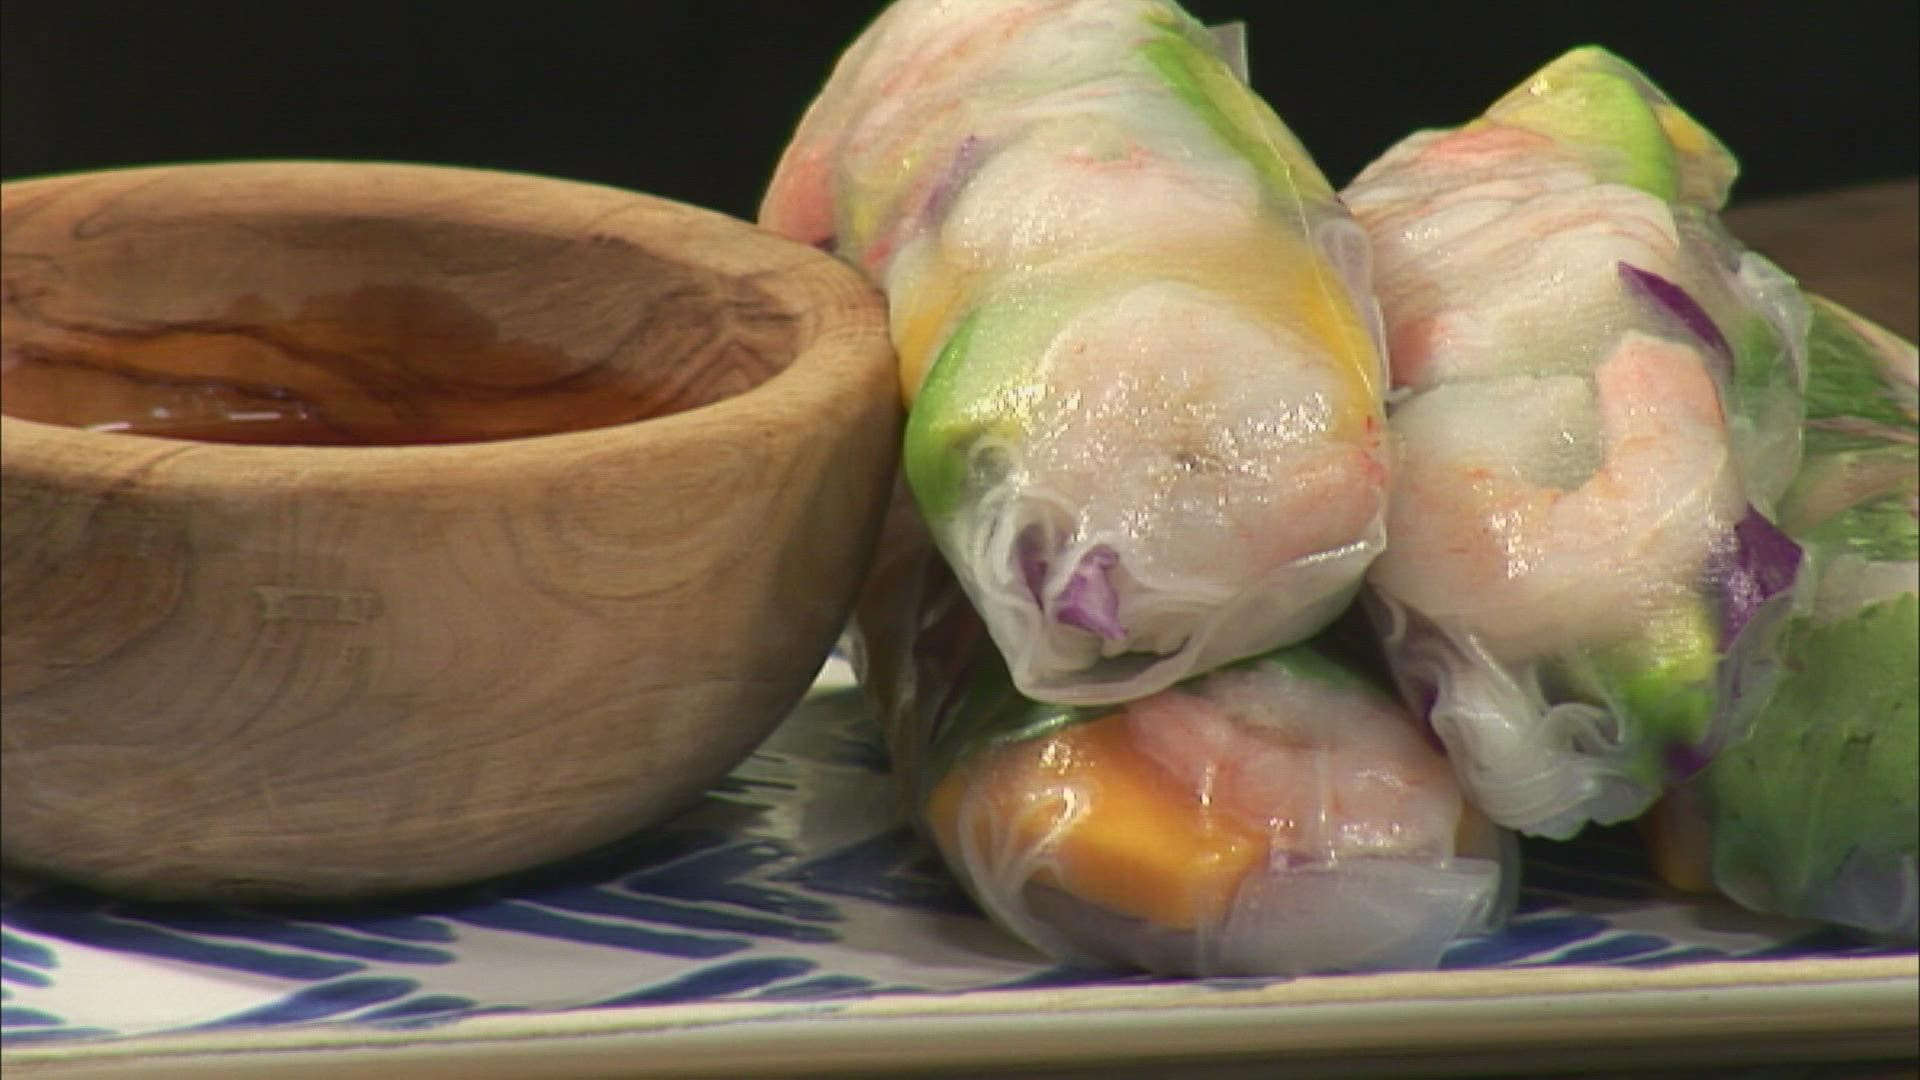 Vanessa Seder shows us how to make summer rolls; a fresh dinner the whole family can help make.